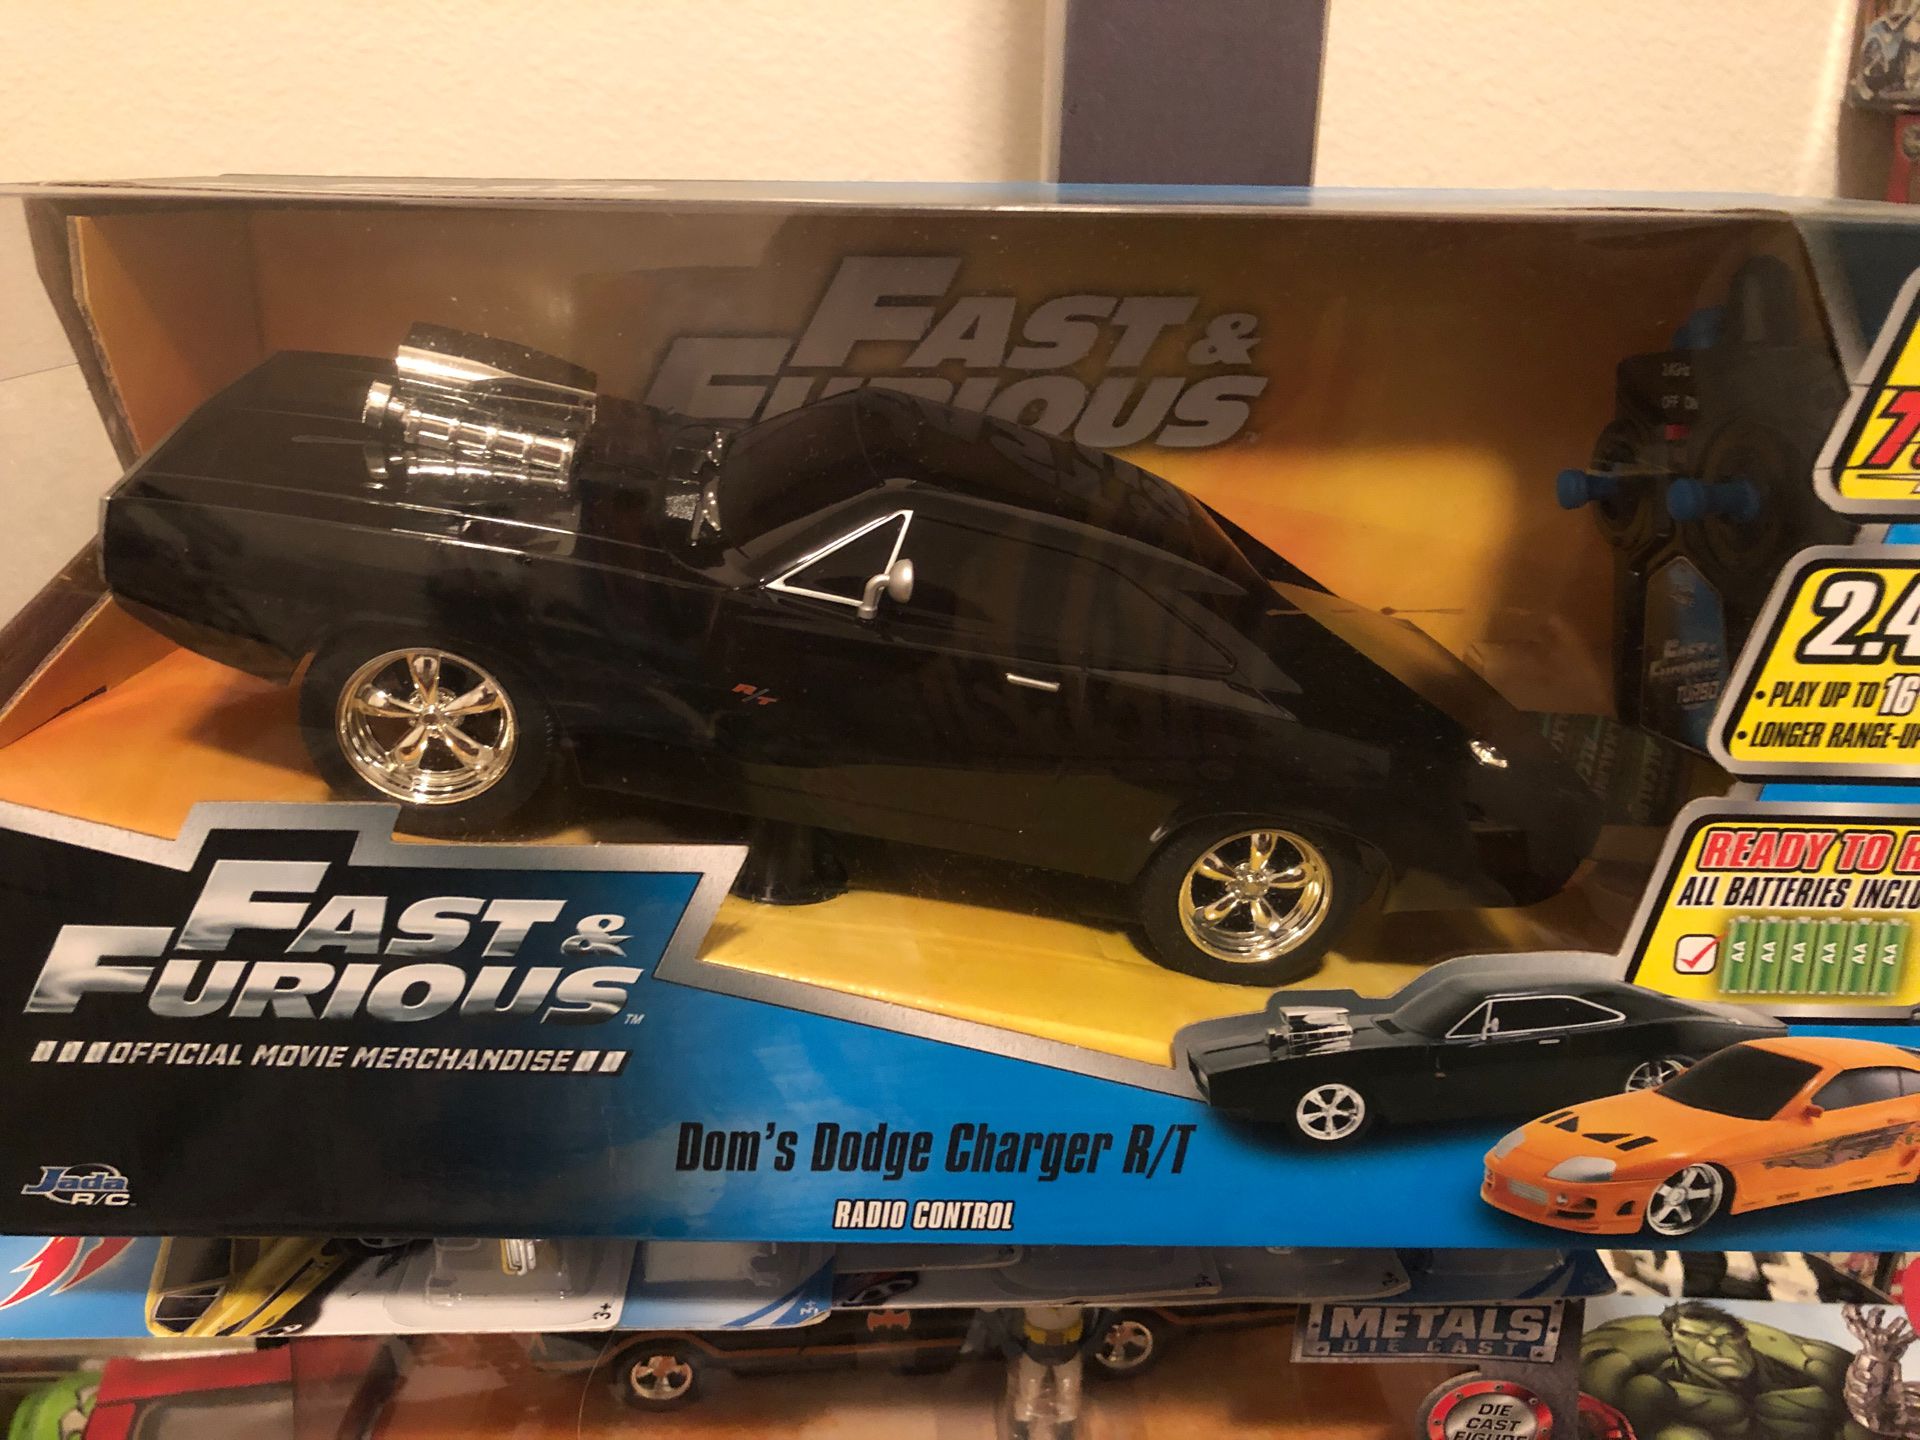 Fast and furious charger remote control